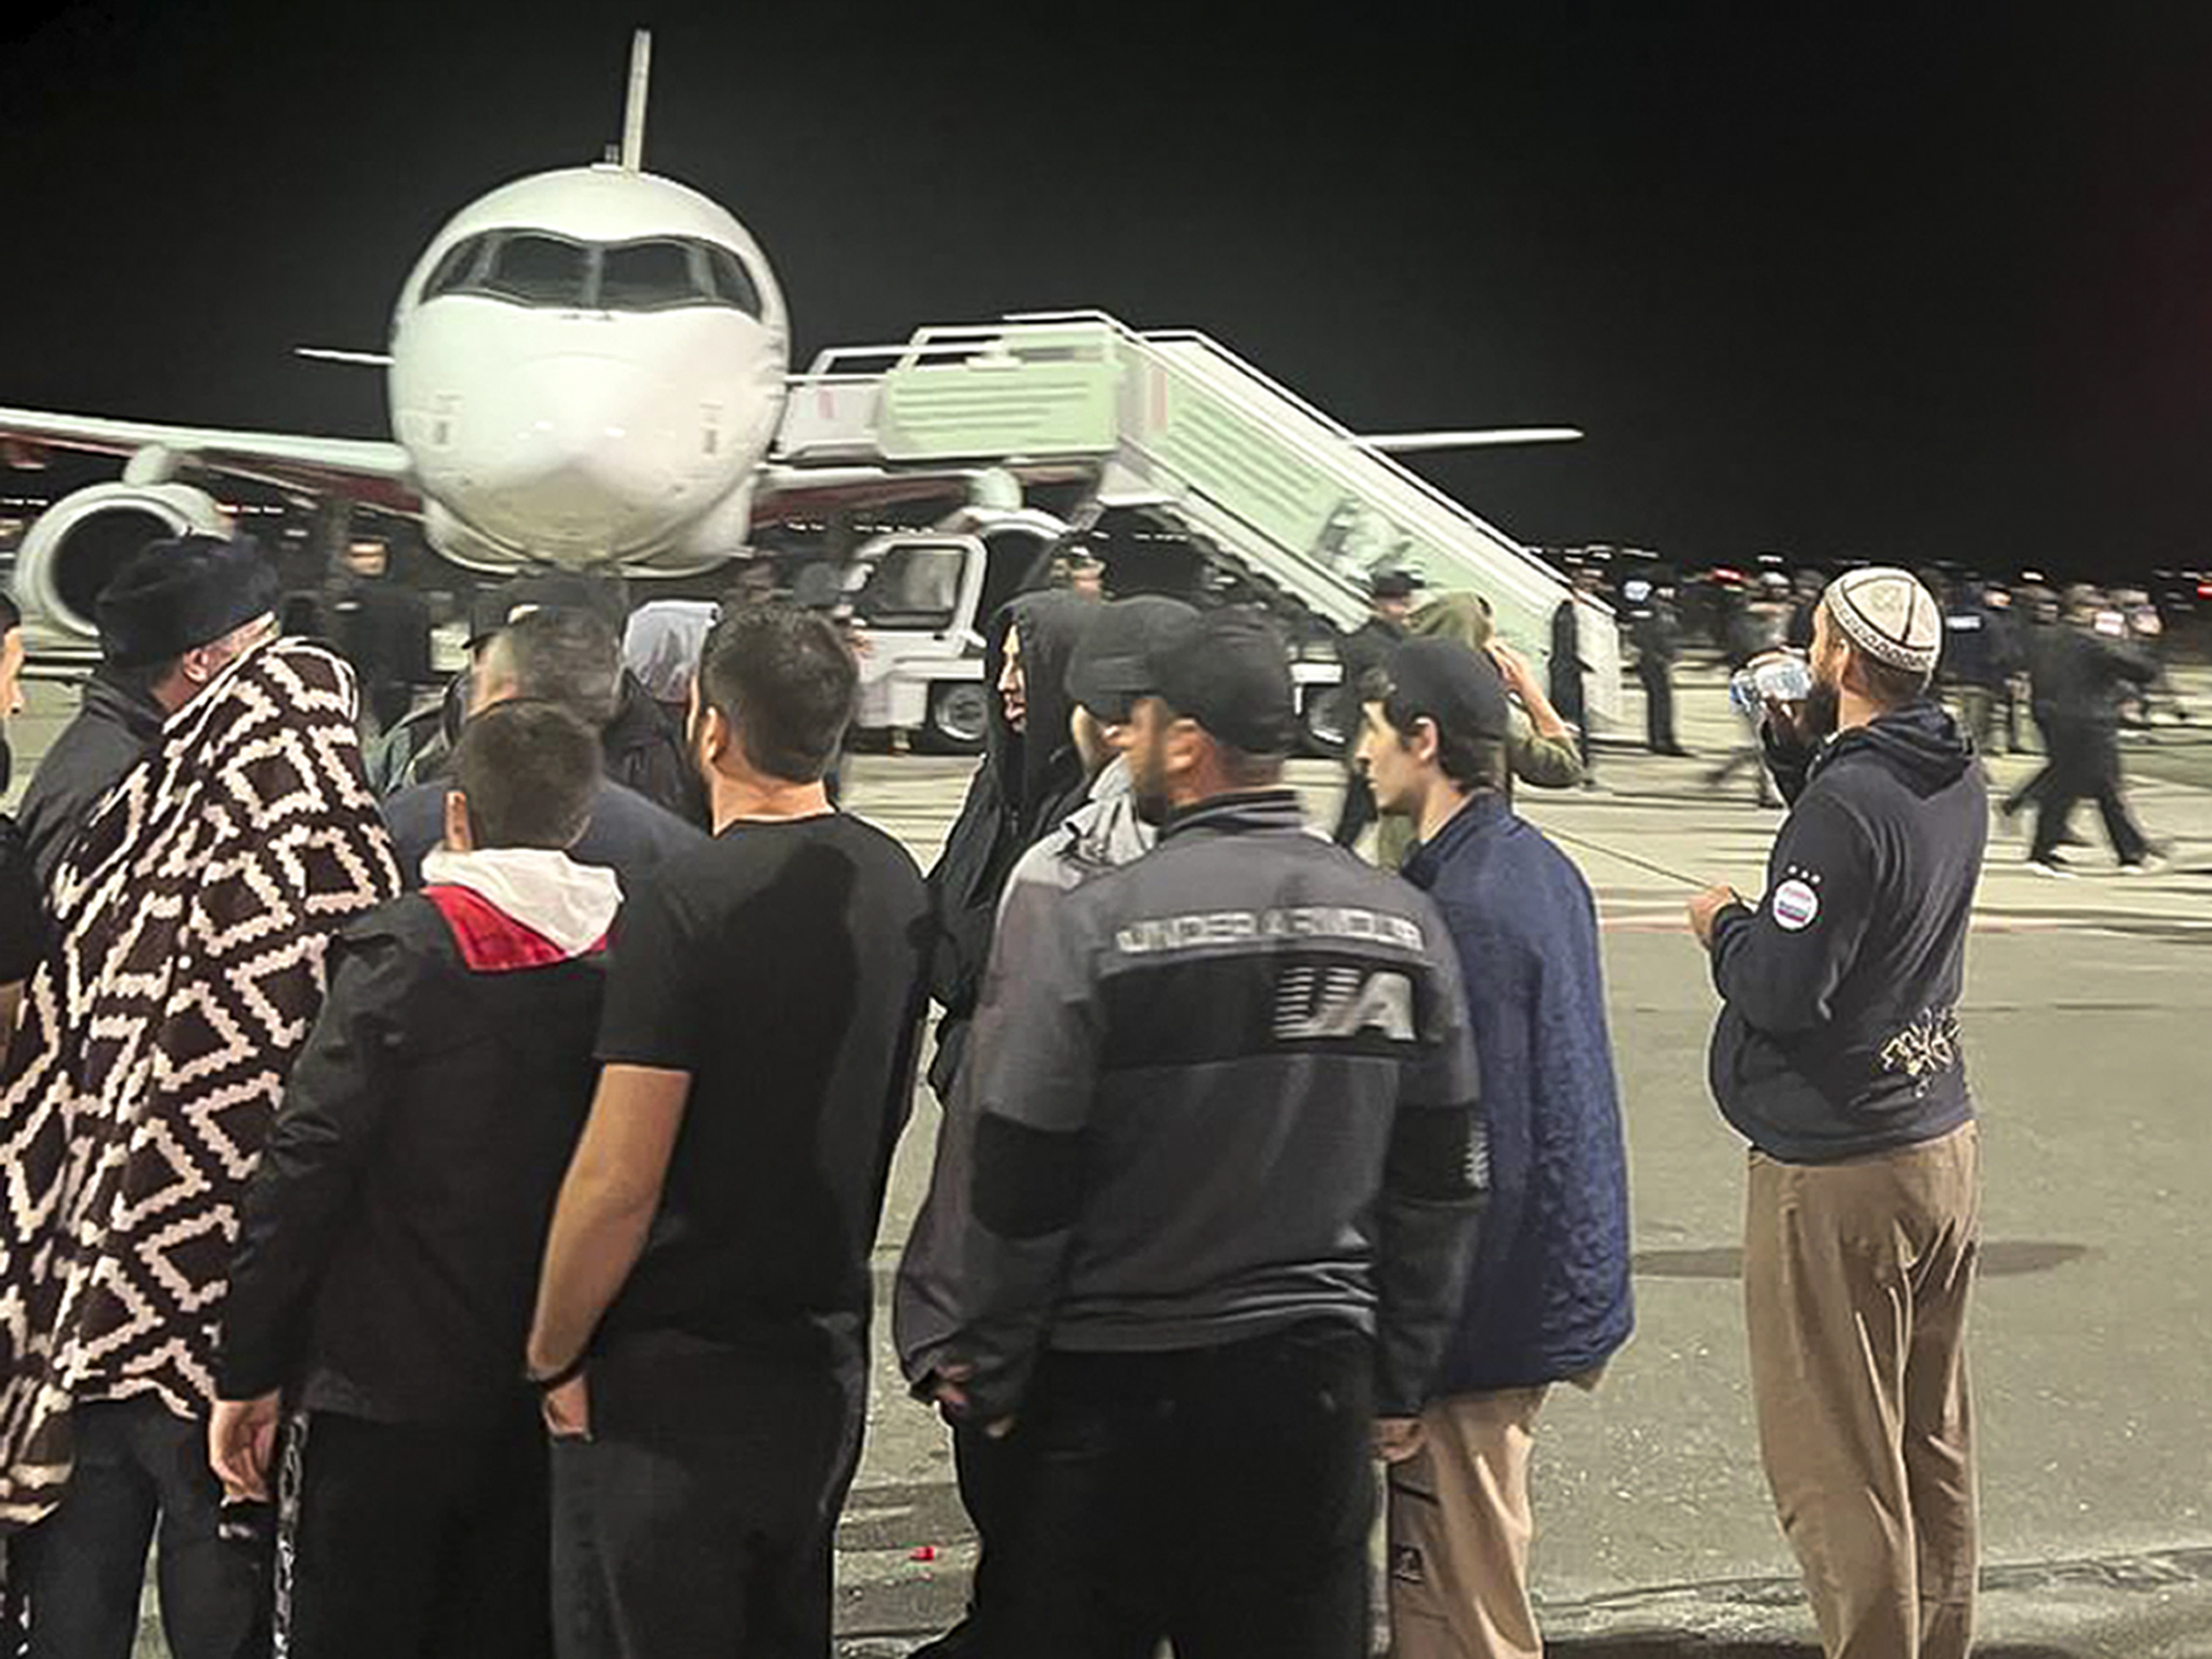 Plane Passengers Prayed But Expected to Be Killed - The New York Times